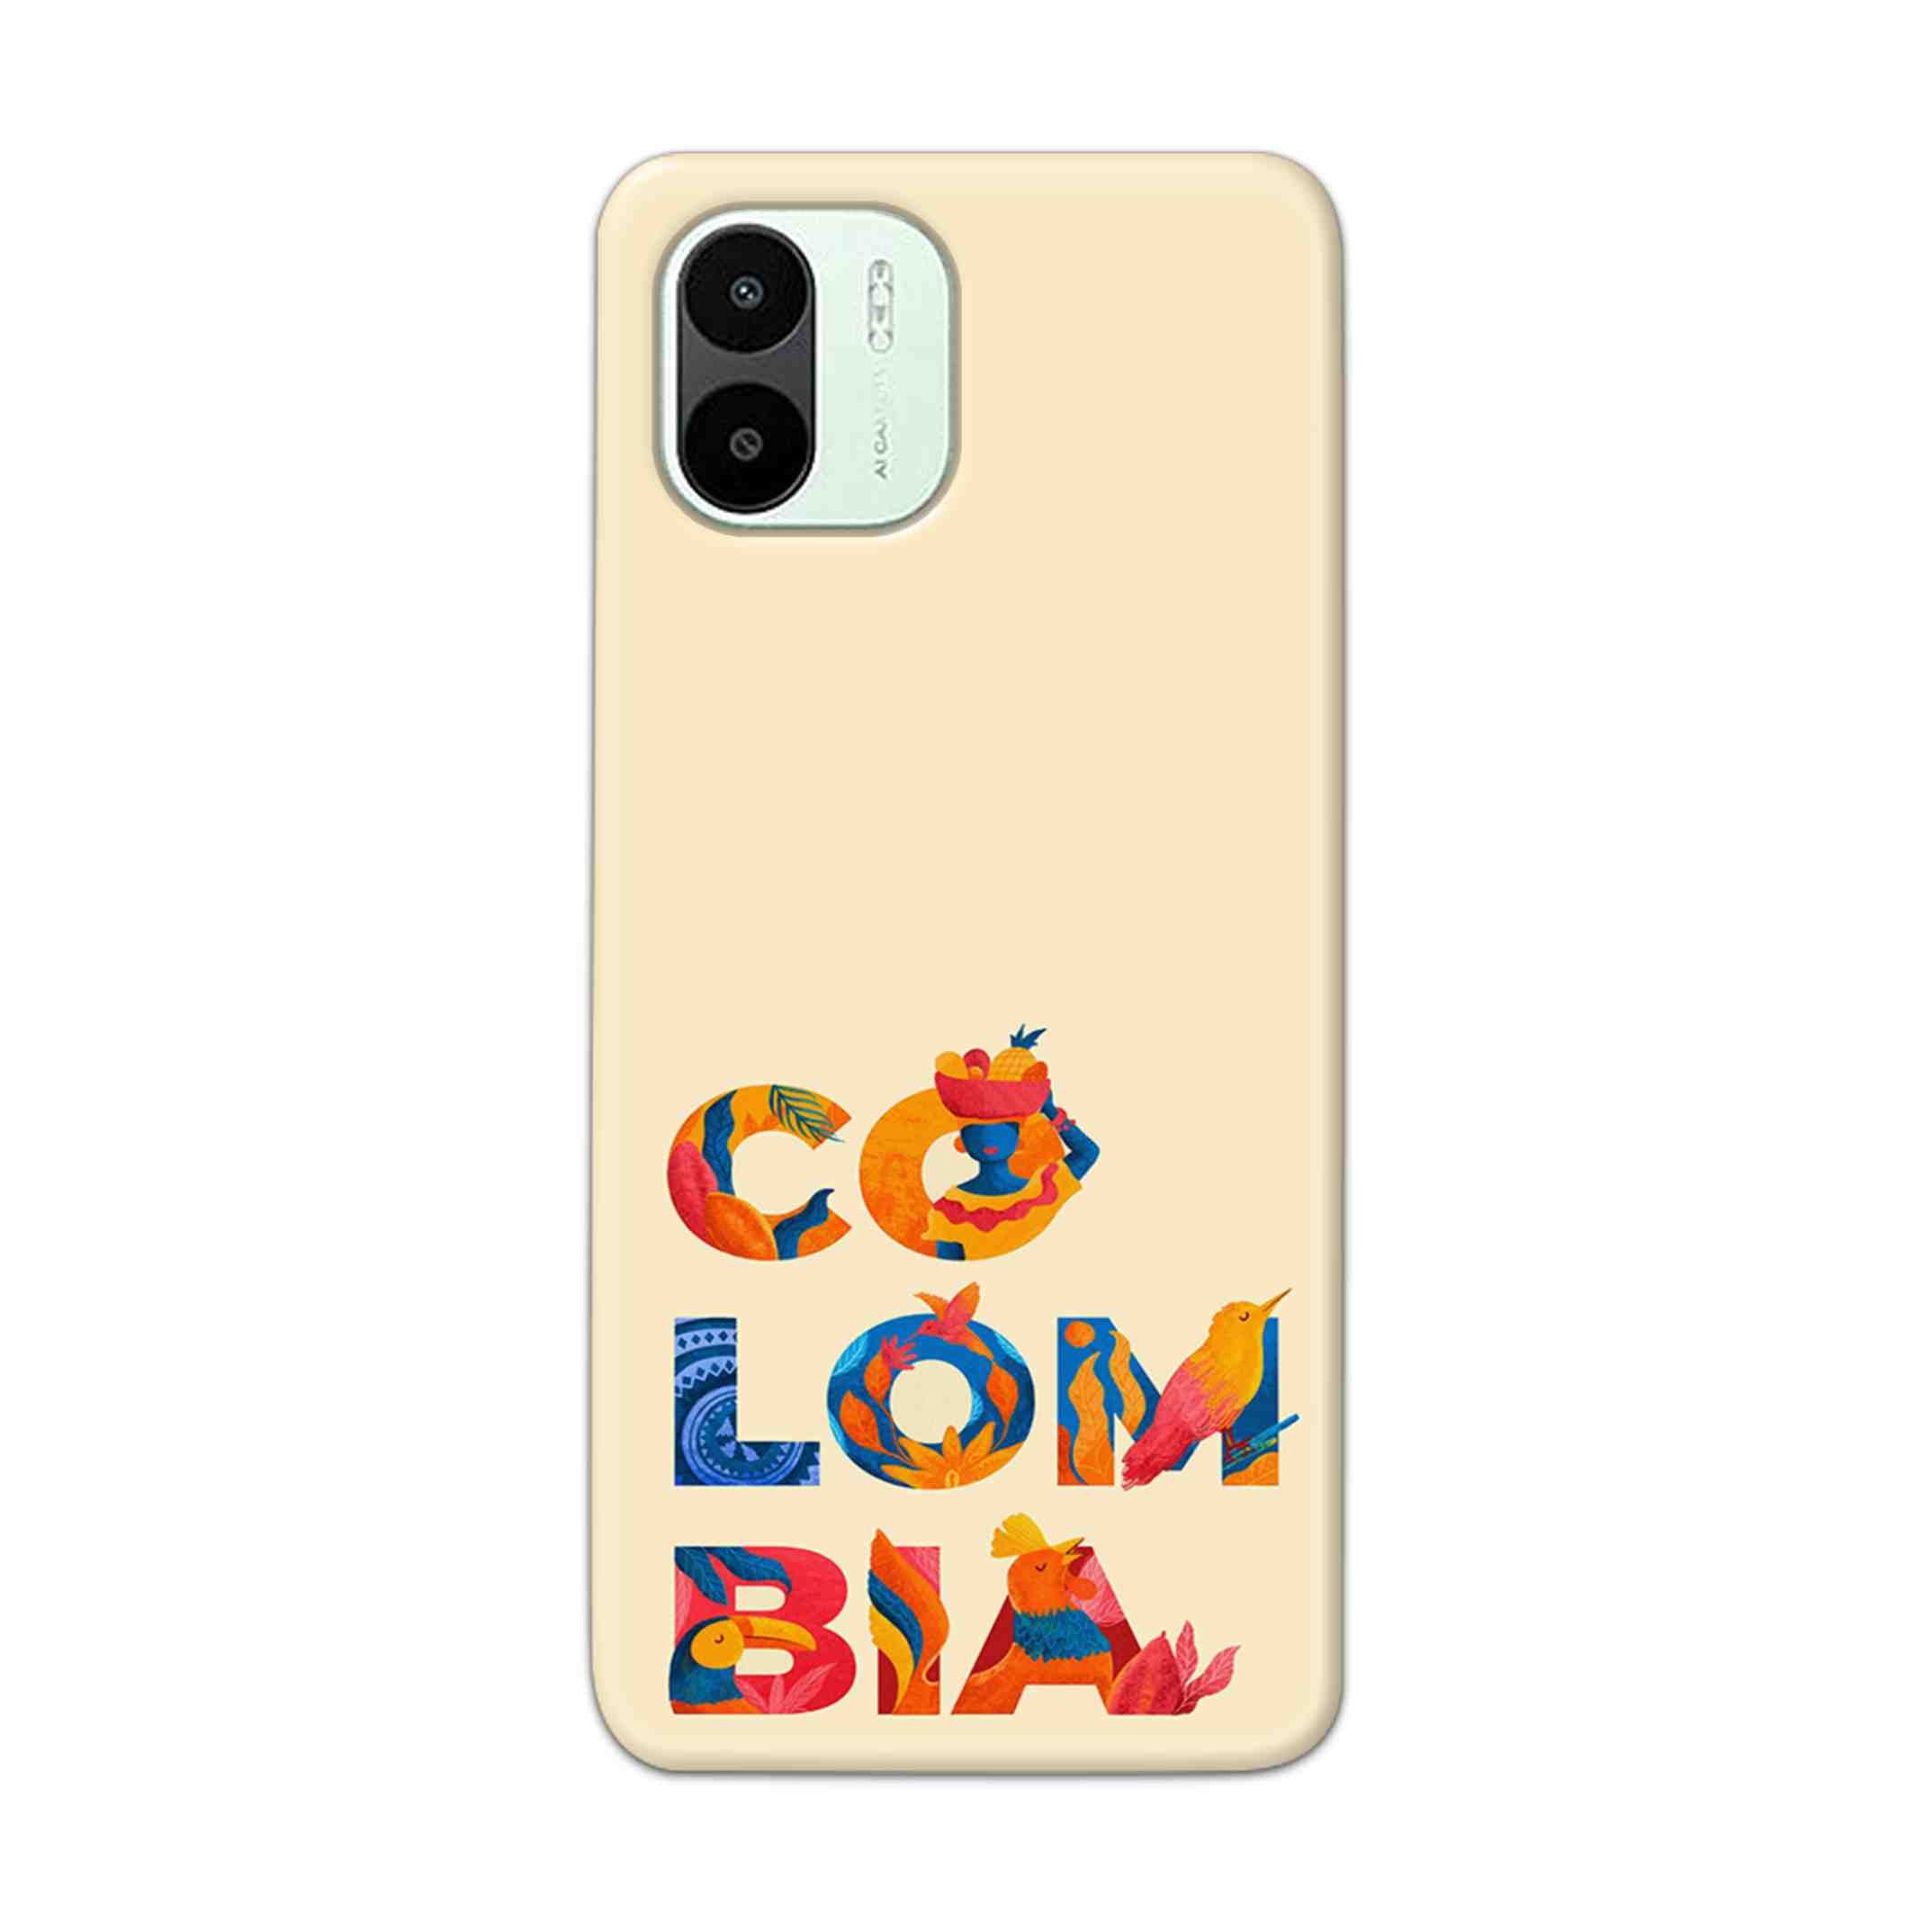 Buy Colombia Hard Back Mobile Phone Case Cover For Xiaomi Redmi A1 5G Online